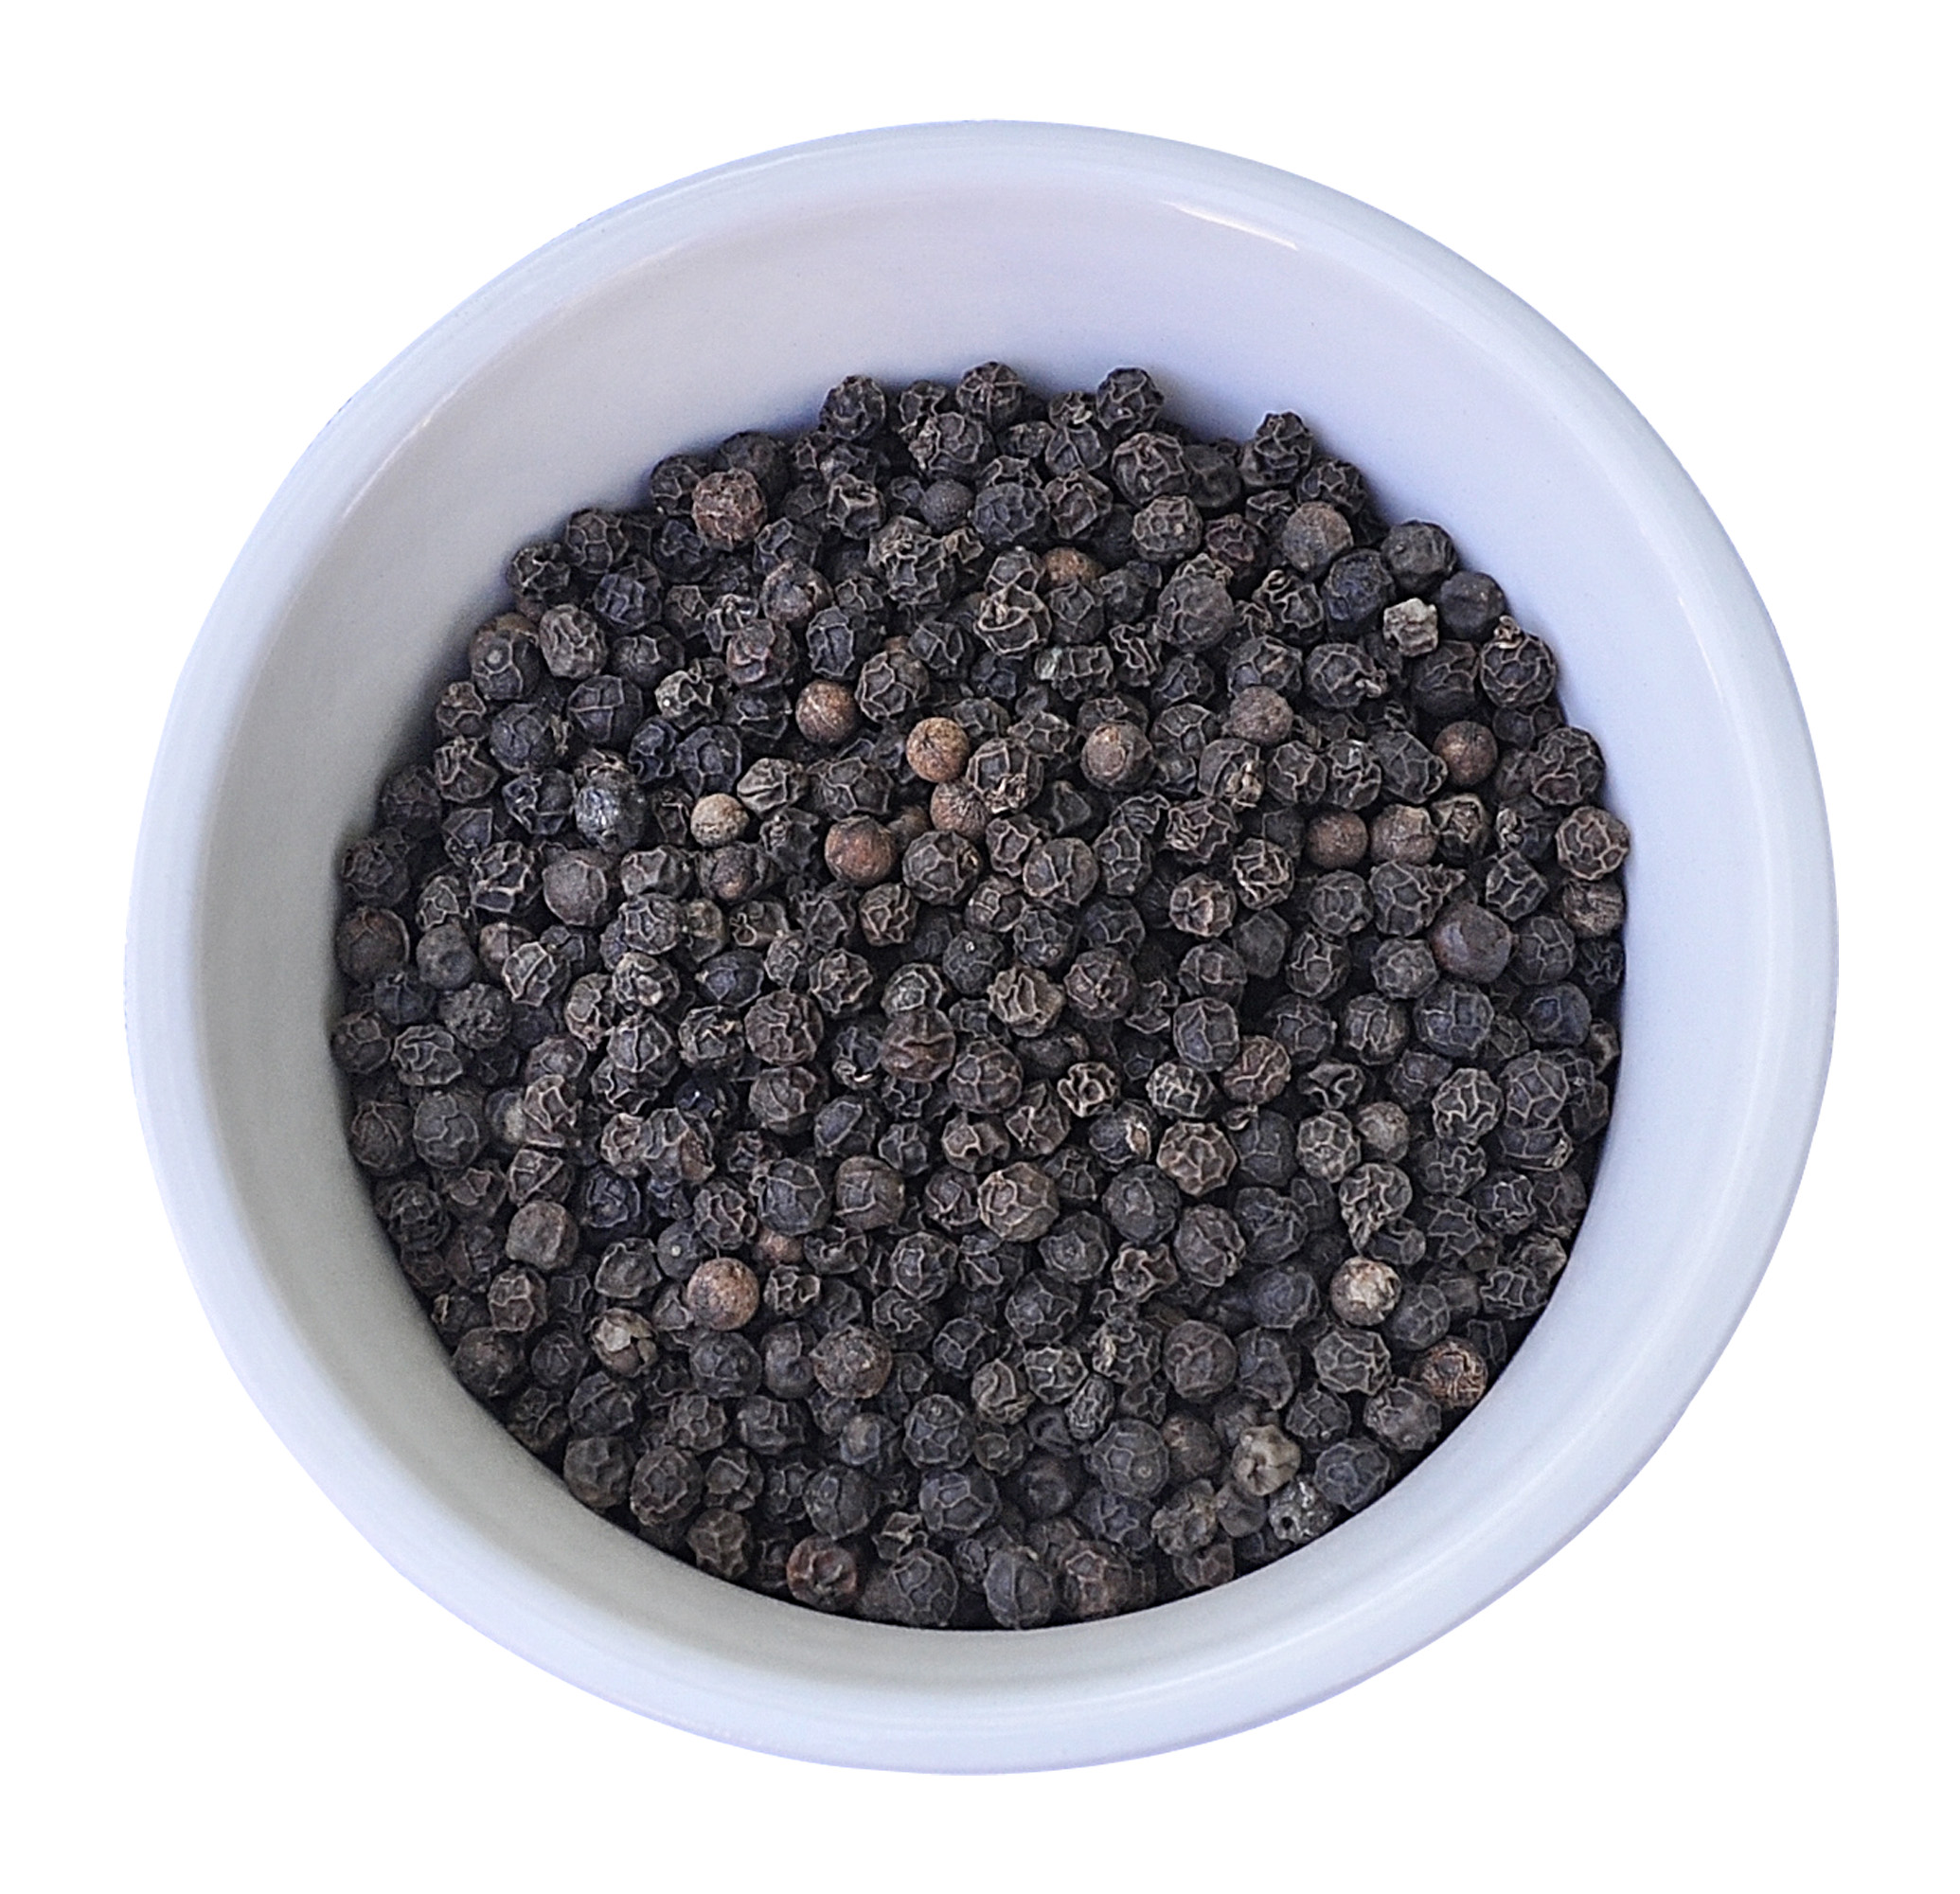  Black Pepper has many benefits. It helps in digestion, and is also known to have anti-oxidant and anti-bacterial properties. 